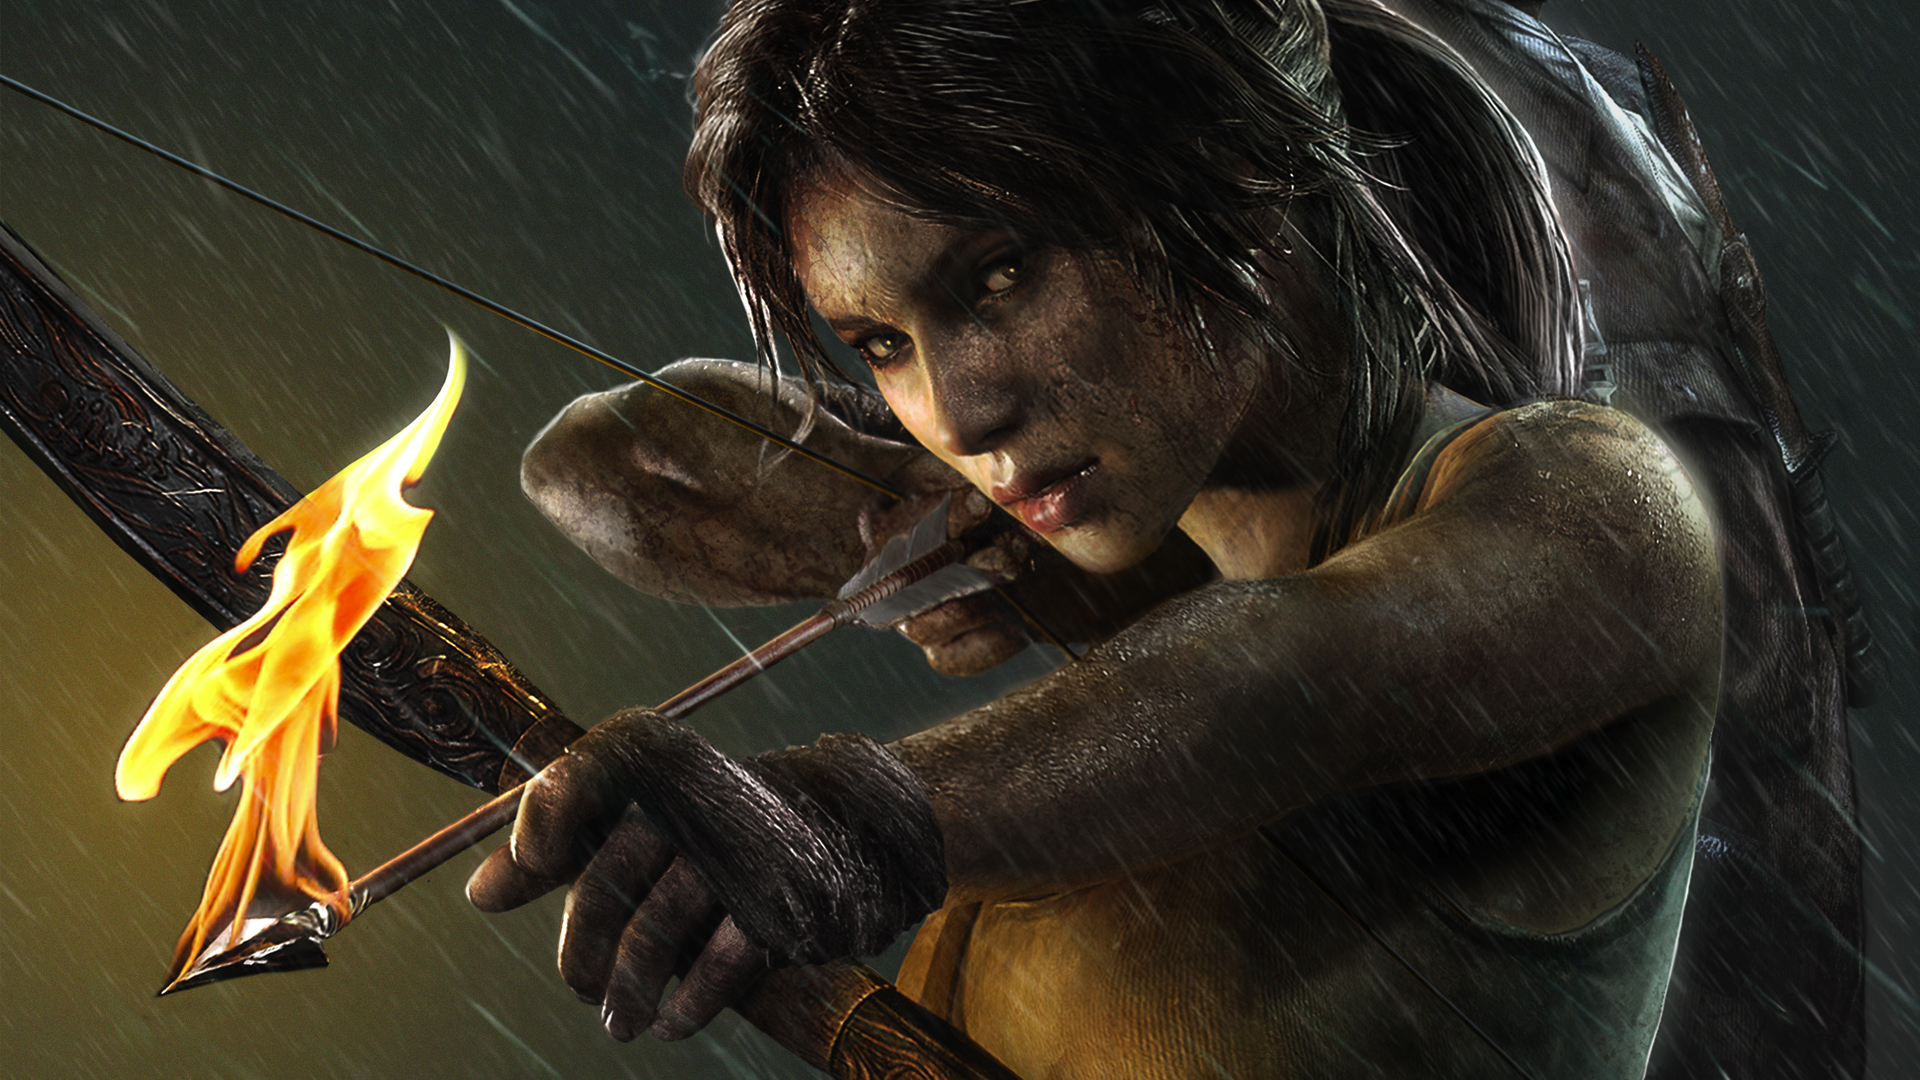 shadow of the tomb raider definitive edition trainer